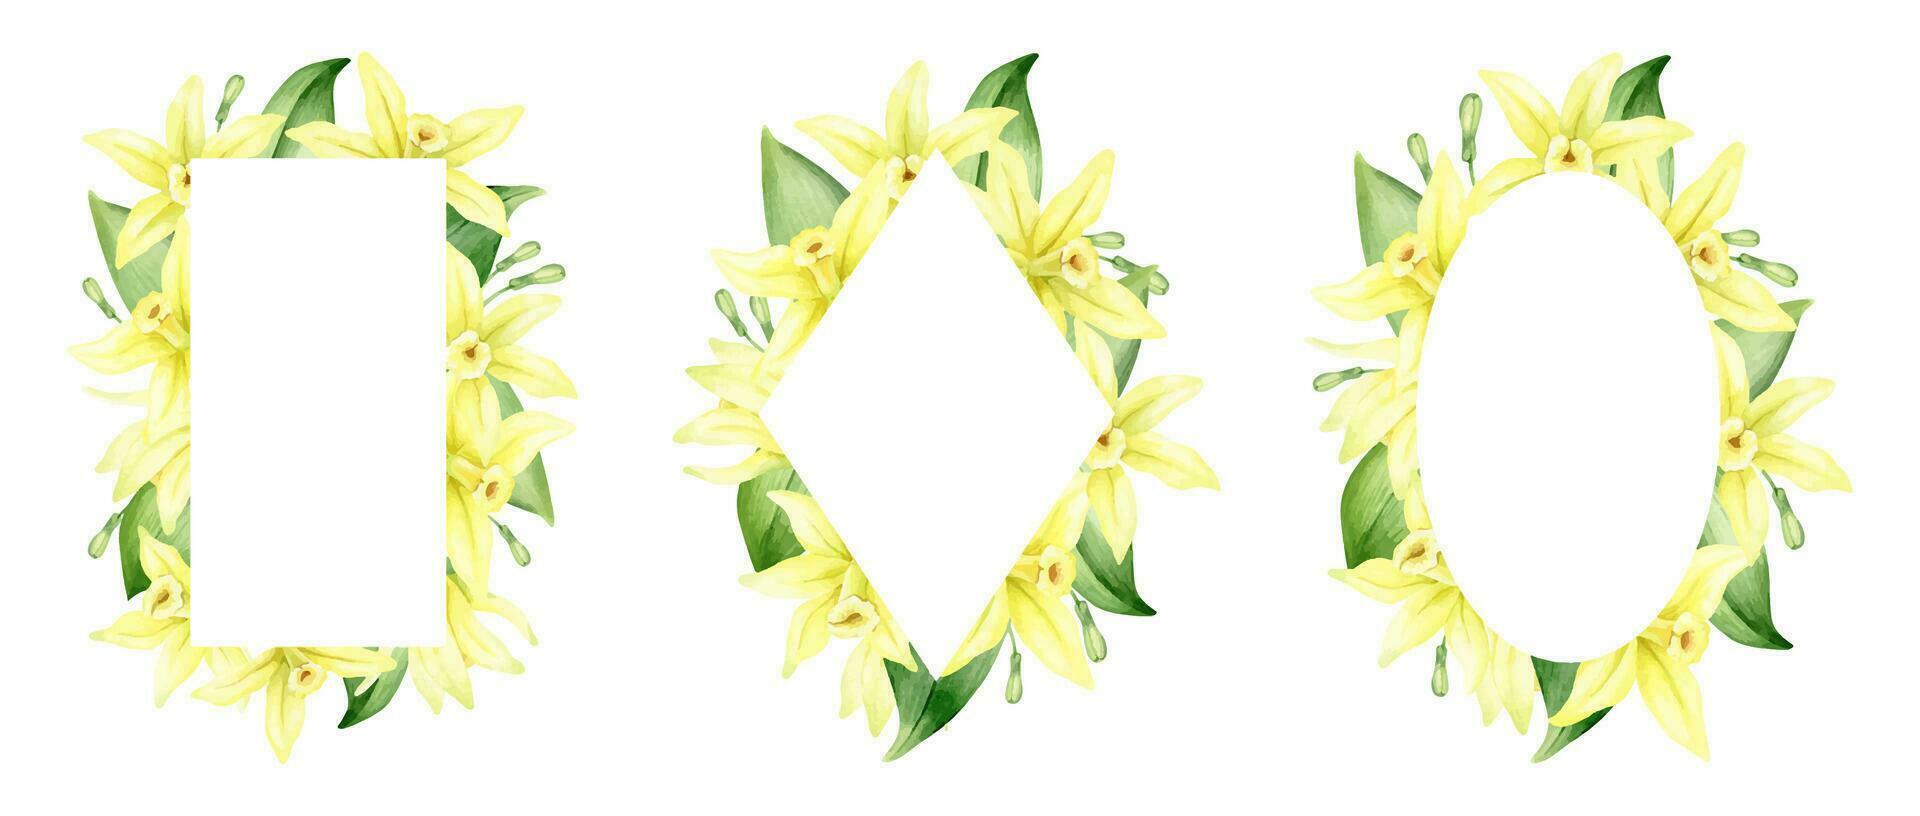 Set of frames of yellow vanilla flowers. Wreaths with tropical exotic flowers. Watercolor illustrations. Isolated. Flavoring for cooking. For greeting cards, postcard, scrapbooking, packaging design vector